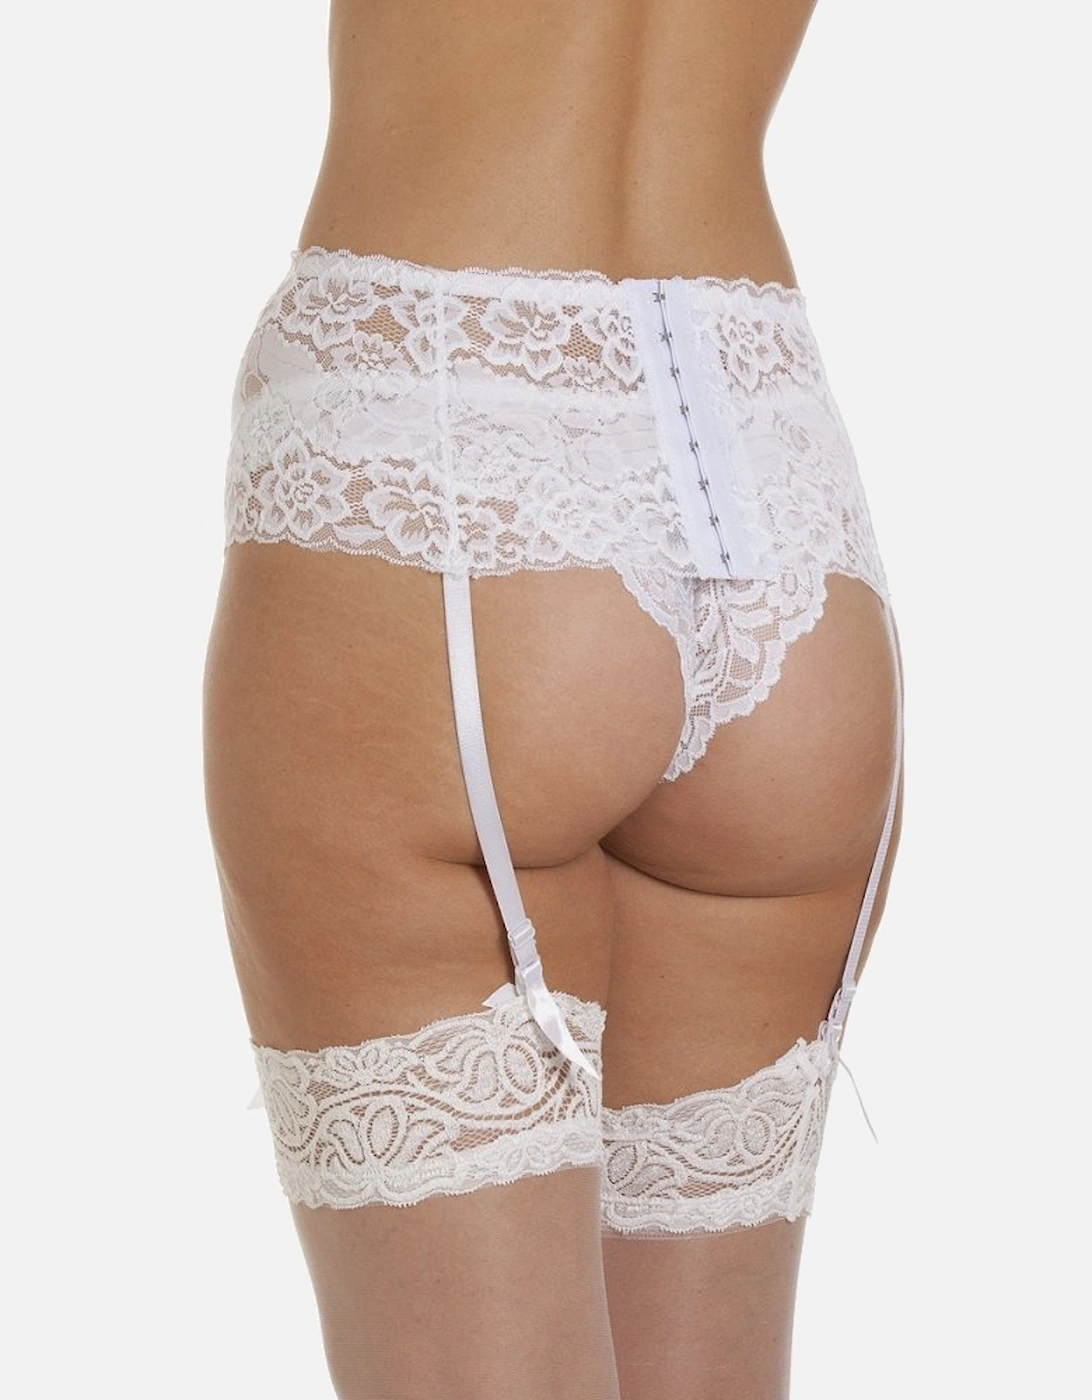 Camille Women's Suspender Belt White Wide Lace Lingerie with Ribbon Strap